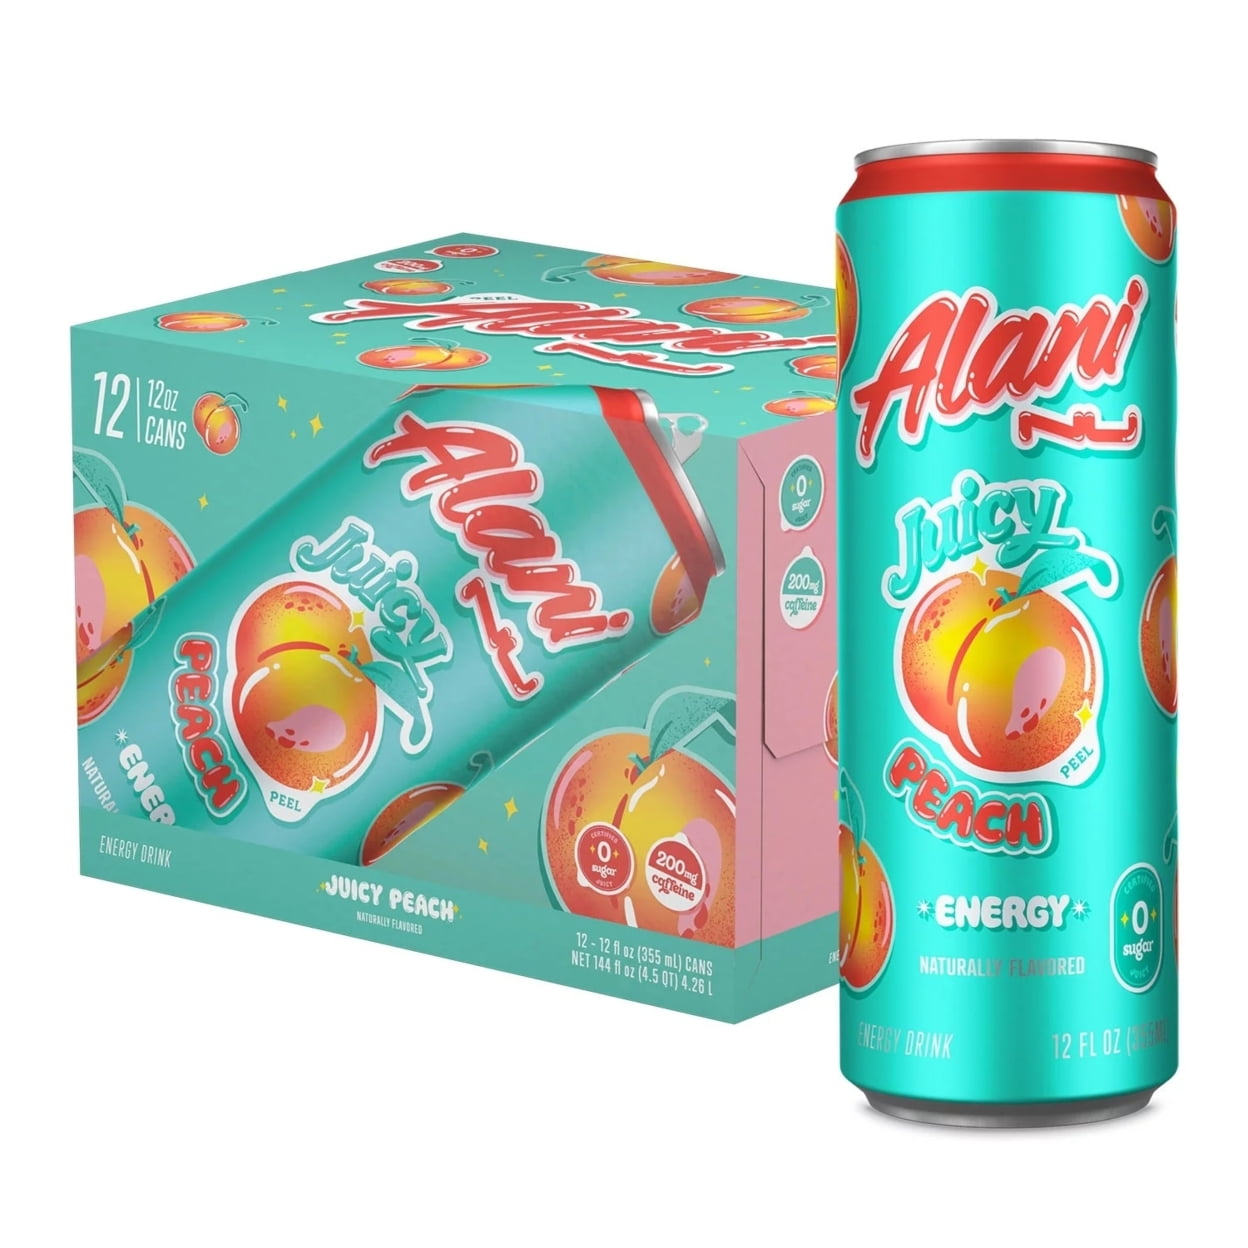 Alani Nu Energy Drink Juicy Peach 12oz Cans (Single Cans)